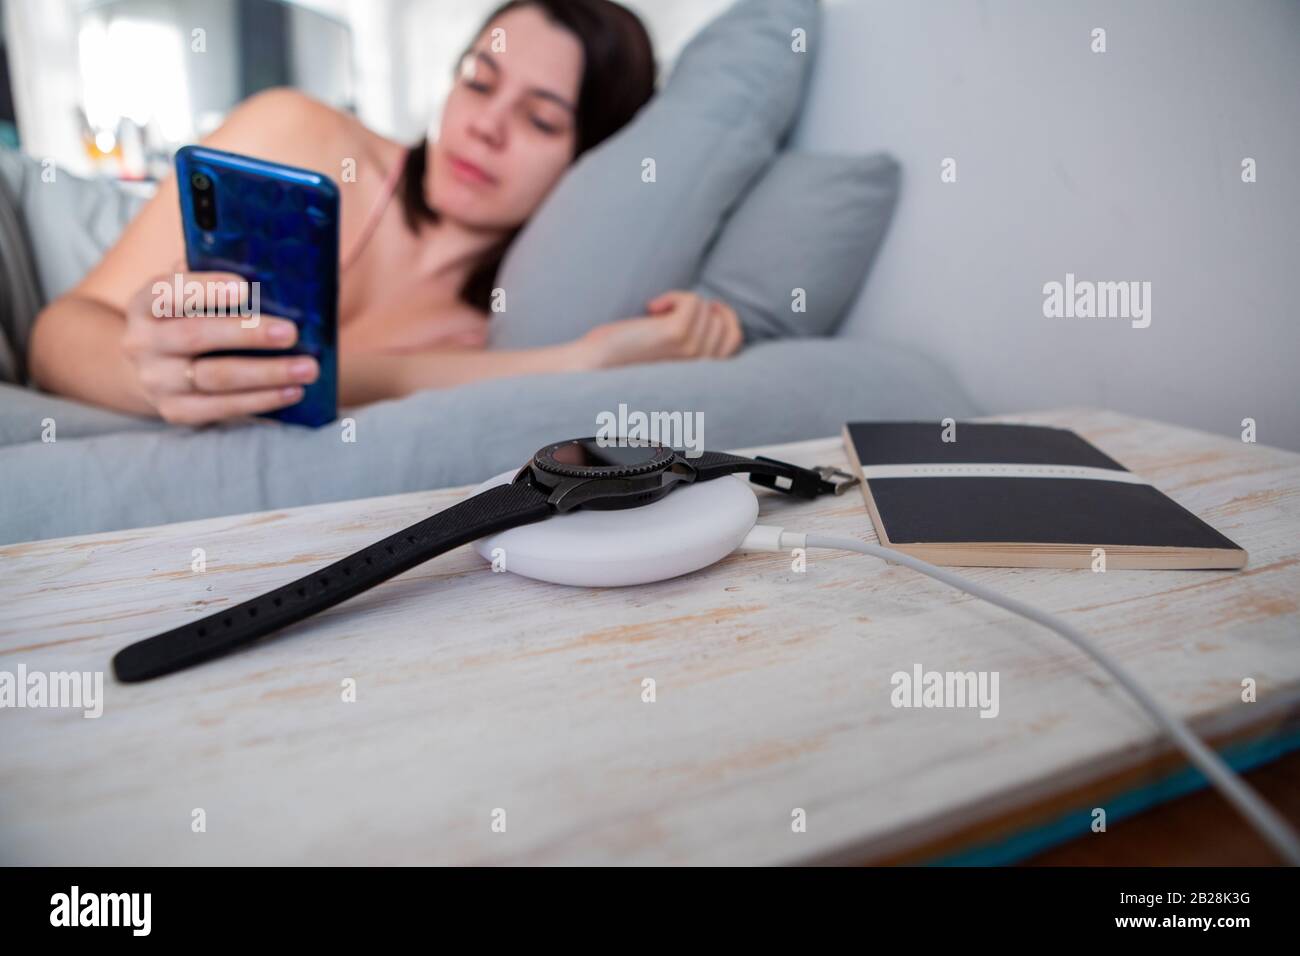 woman surfing internet on cellphone laying in bed smart watch on wireless charger Stock Photo